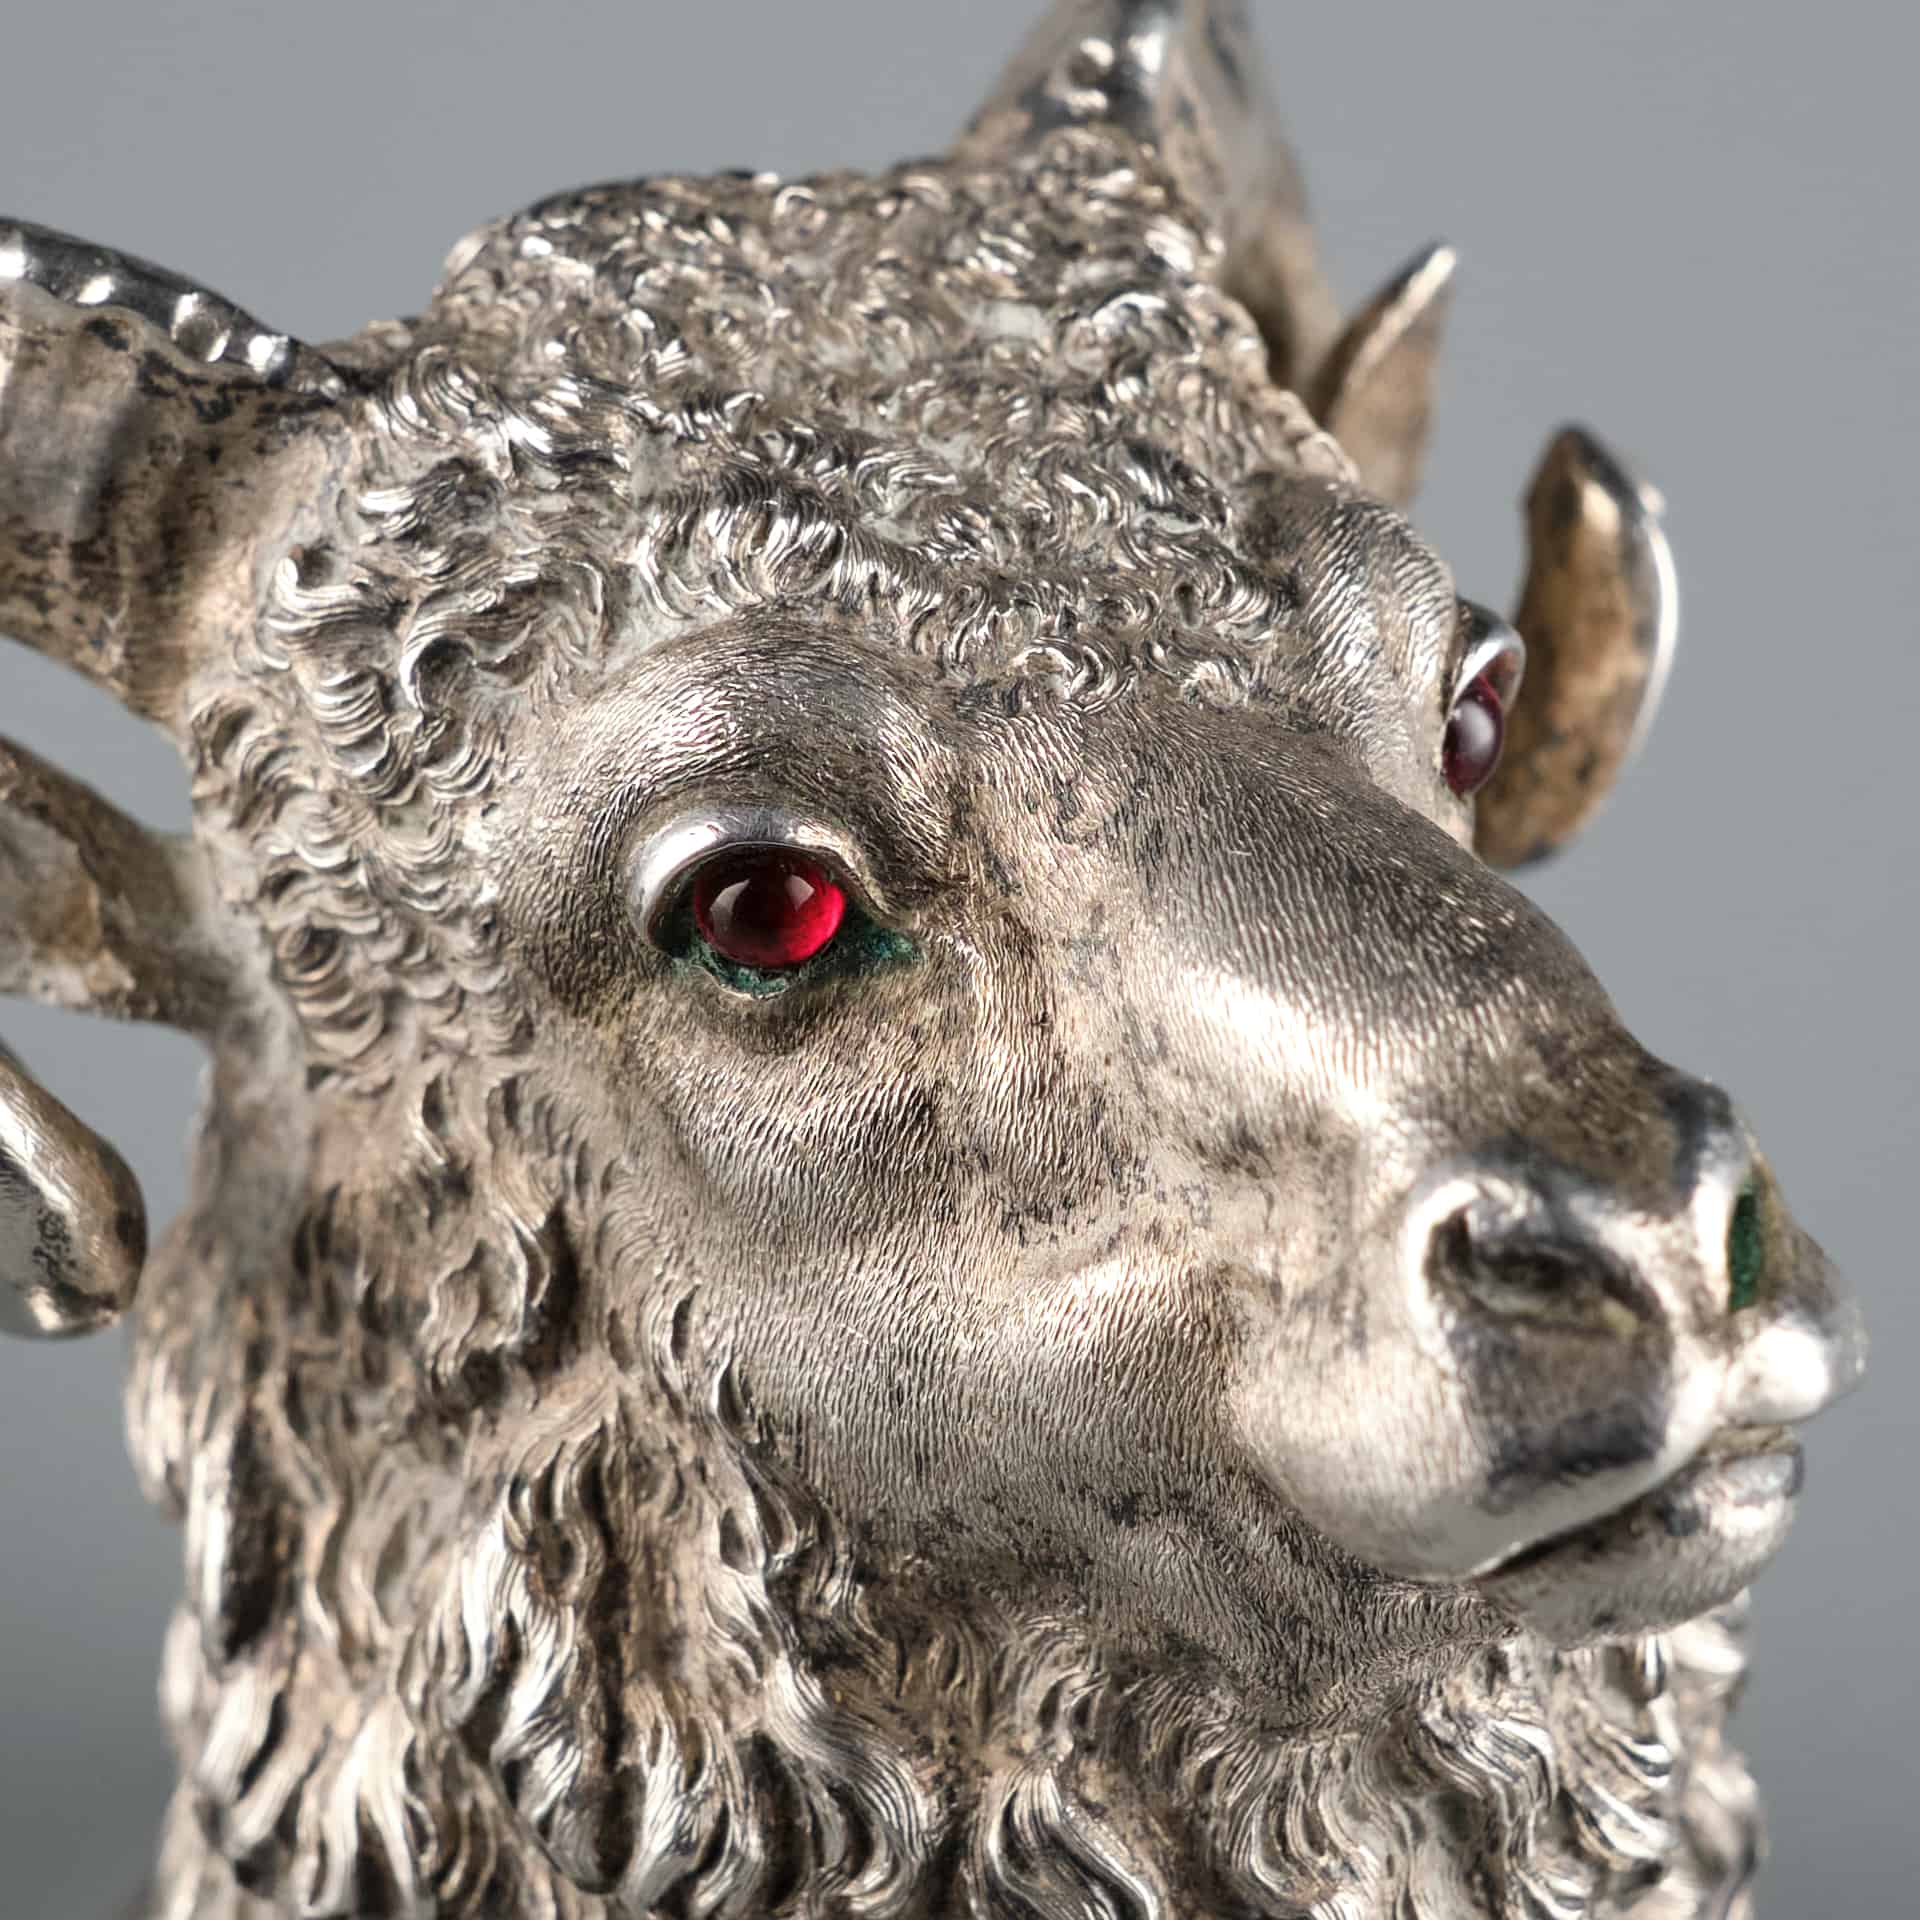 Showing a very fine Russian silver stirrup cup in the form of a Ram's head. The silver is beautifully casted to detail the Ram's face, horns, and mane. The ram's eyes are set by two bright red ruby gemstones.